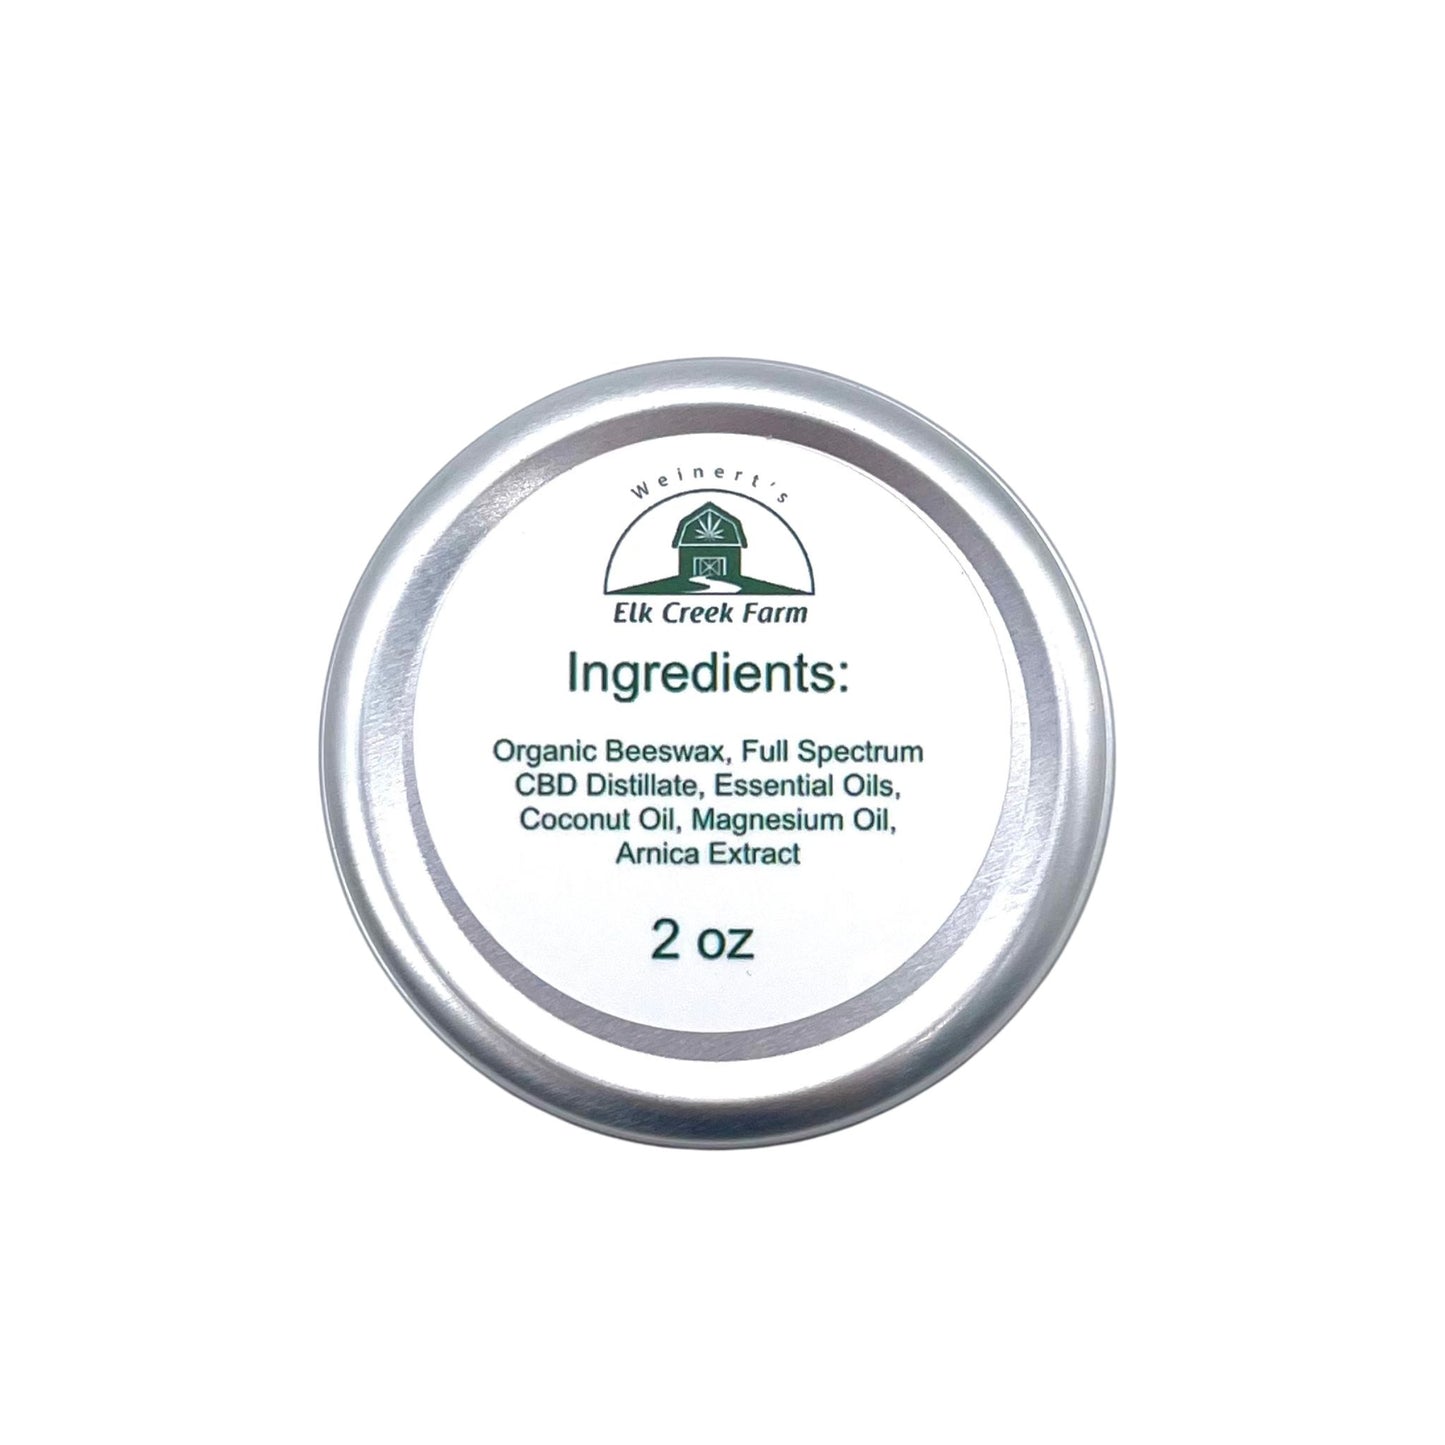 A tin of CBD Salve sitting on a white background. This CBD Salve is made with organic beeswax, full spectrum CBD, essential oils, Coconut oil, magnesium oil and arnica extract.